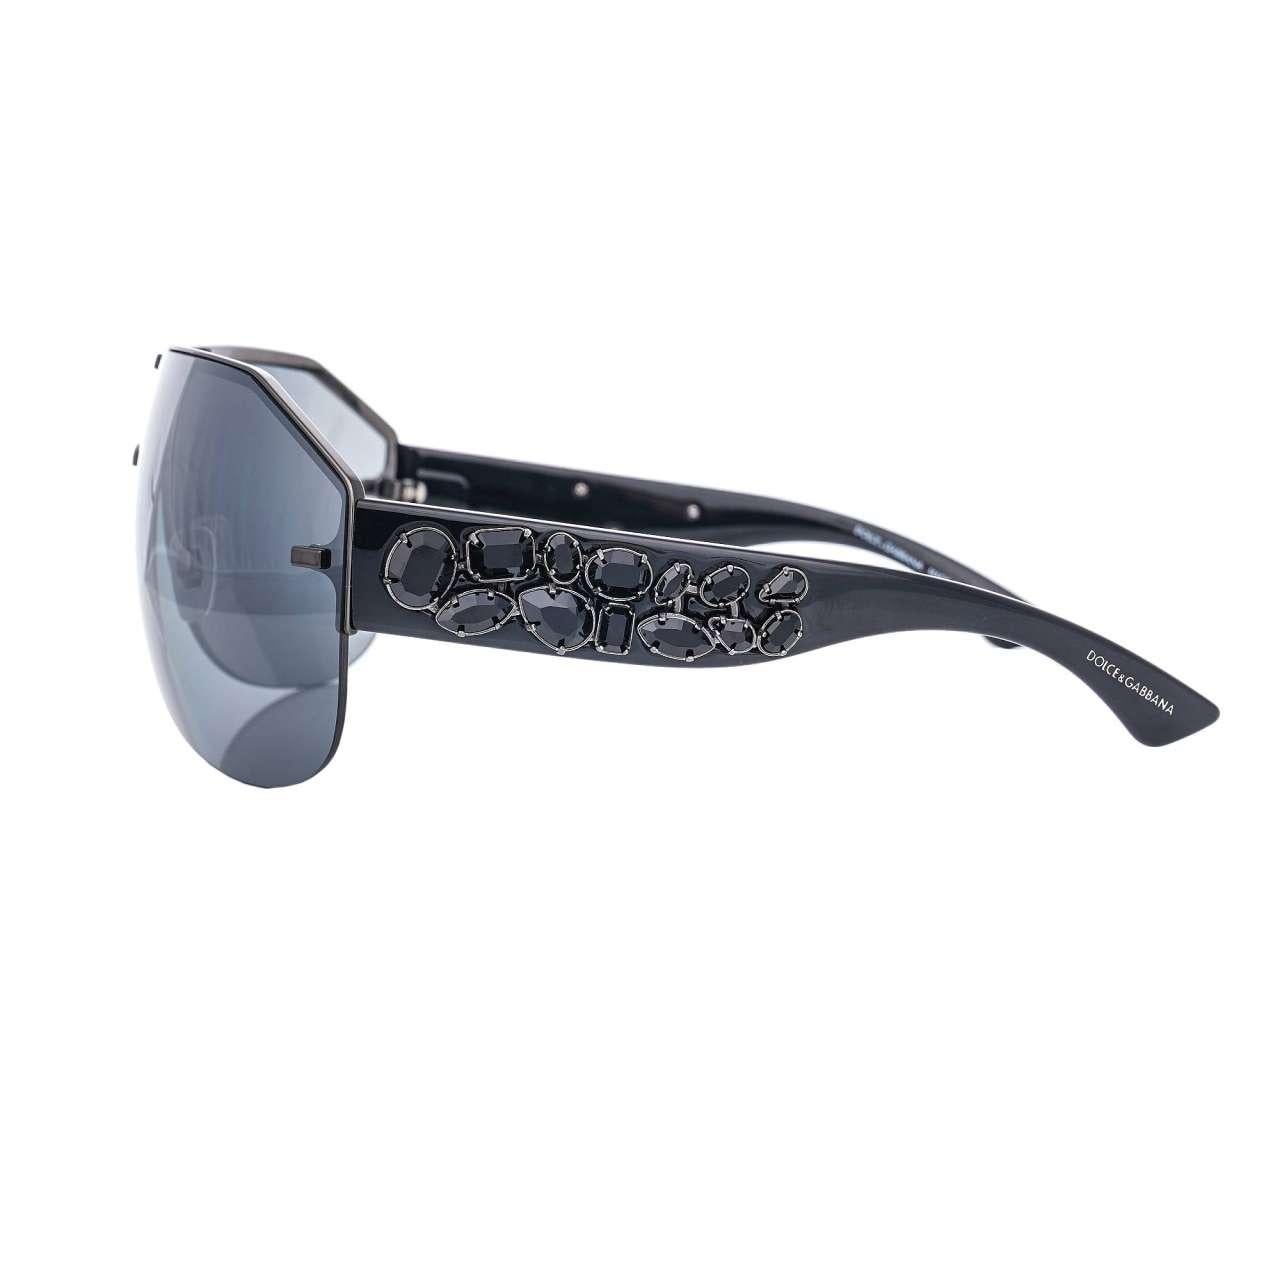 - Oversized jeweled mirrored Wrap Sunglasses DG 2150 embellished with crystals and logo in black by DOLCE & GABBANA - MADE IN ITALY - Former RRP: EUR 550 - New with Case - Model: DG 2150 - Color Frame: Black - Color Lense: Gray - Material Frame: